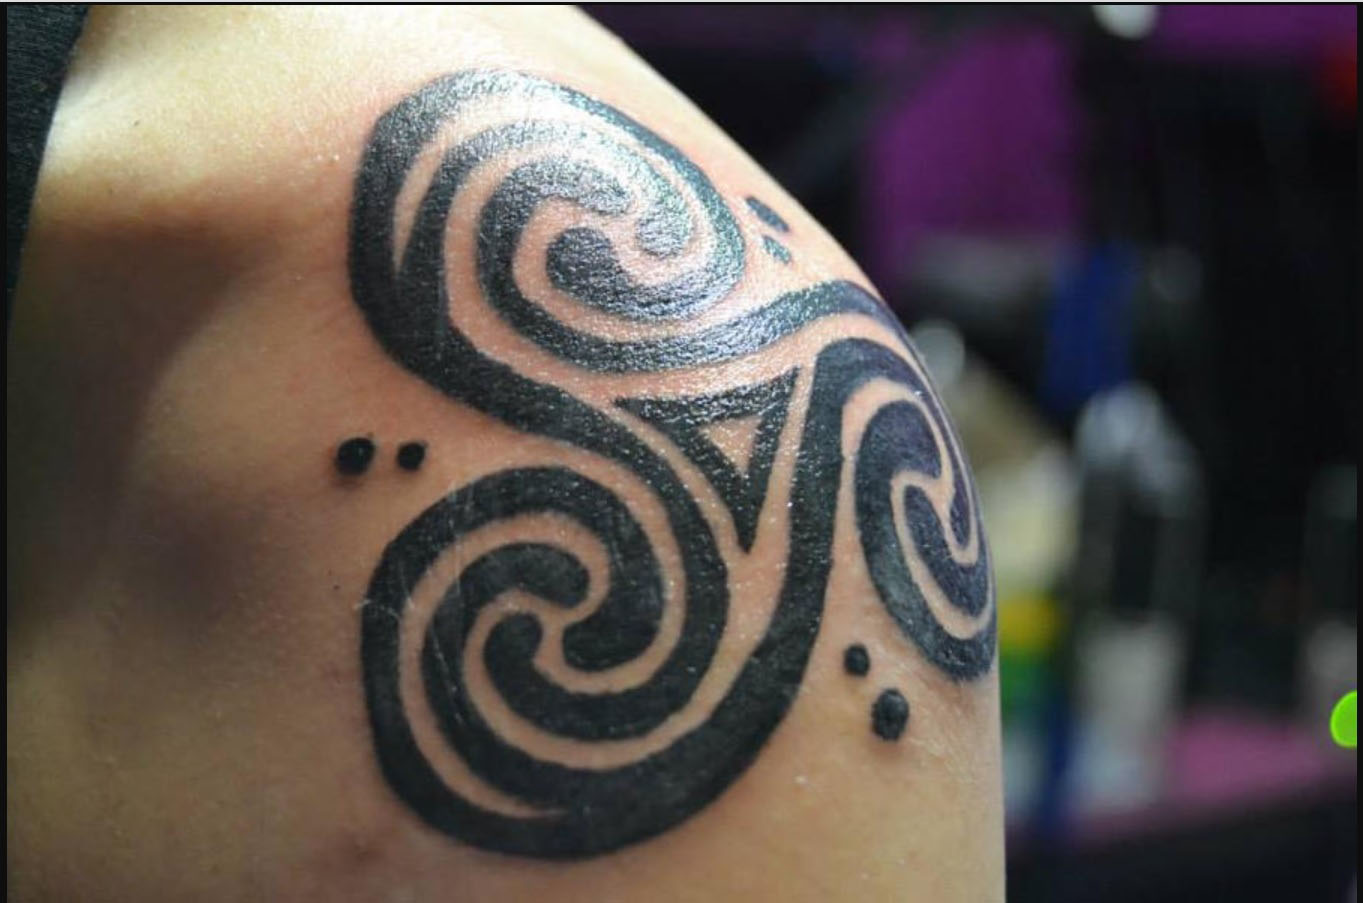 Triskele Tattoo Meaning: Exploring Tattoo Meanings and Their Cultural Significance